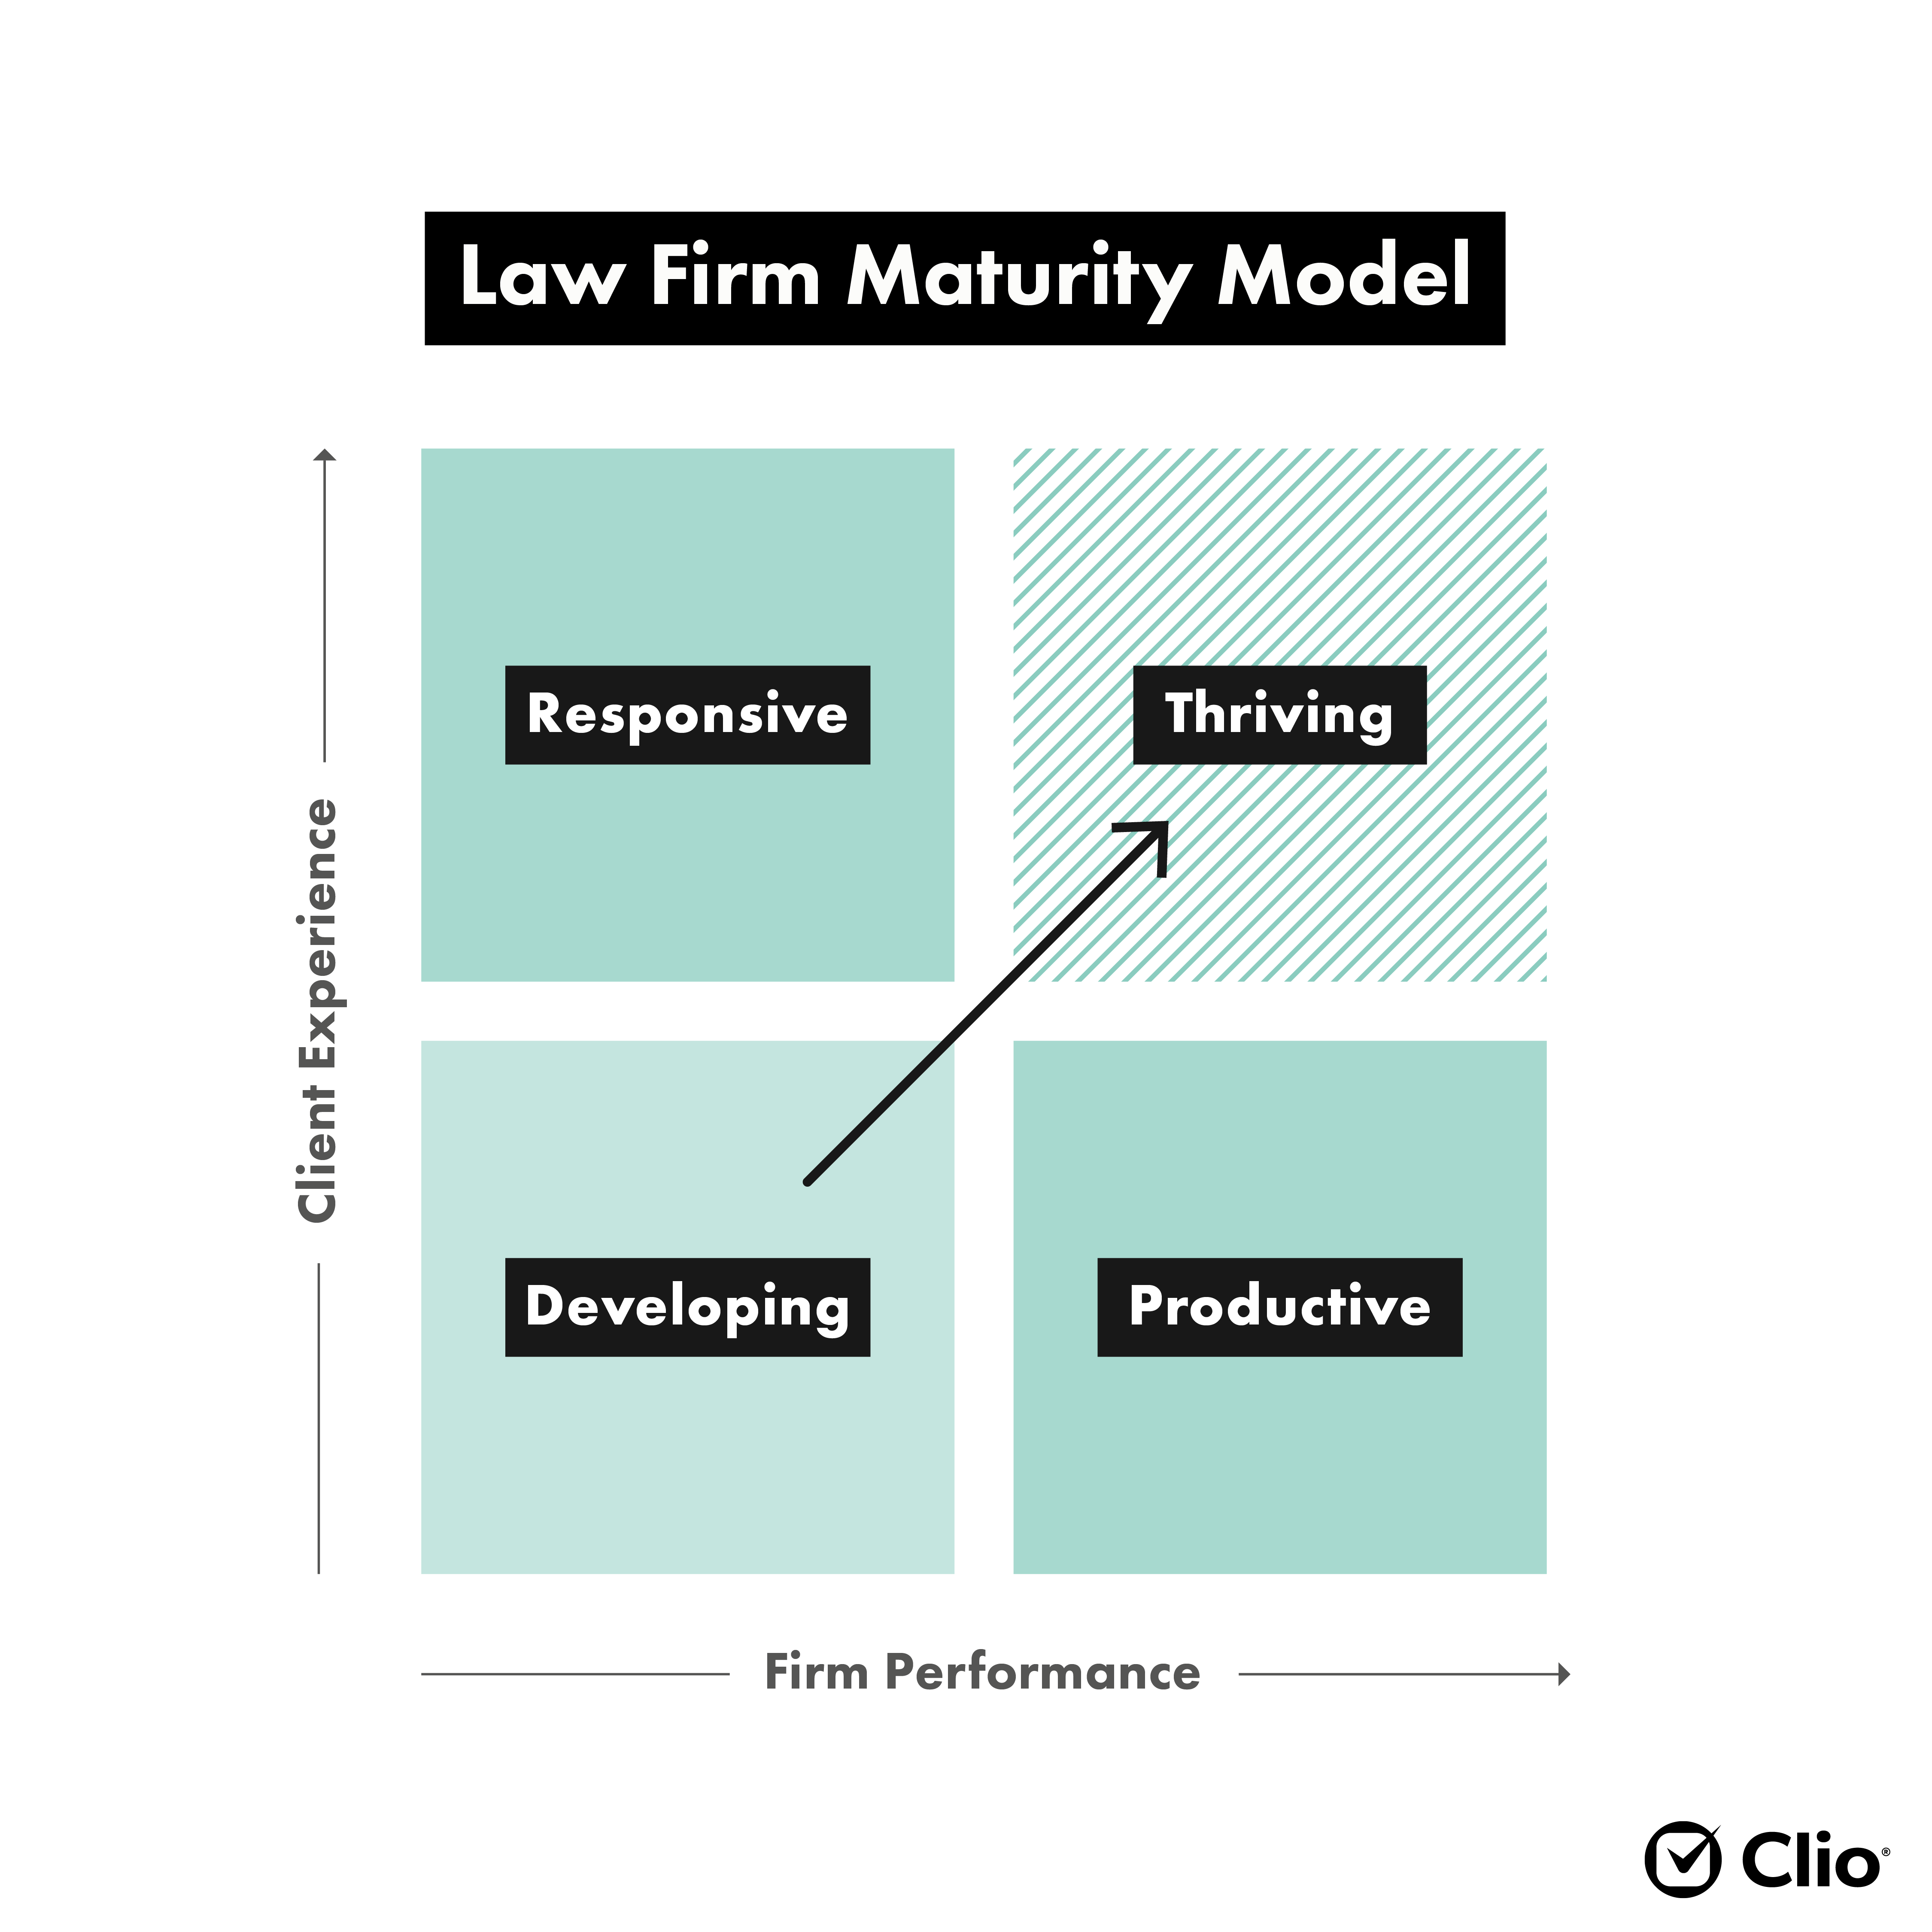 Included in this year's Legal Trends Report was the Law Firm Maturity Model, which outlines a new framework for law firm success. As illustrated in the model, “thriving” law firms experience high growth because they strike a balance between revenue-generating tasks and delivering exceptional client experiences. This leads to more cost-efficient and productive business models that see increased returns on efforts over time.
